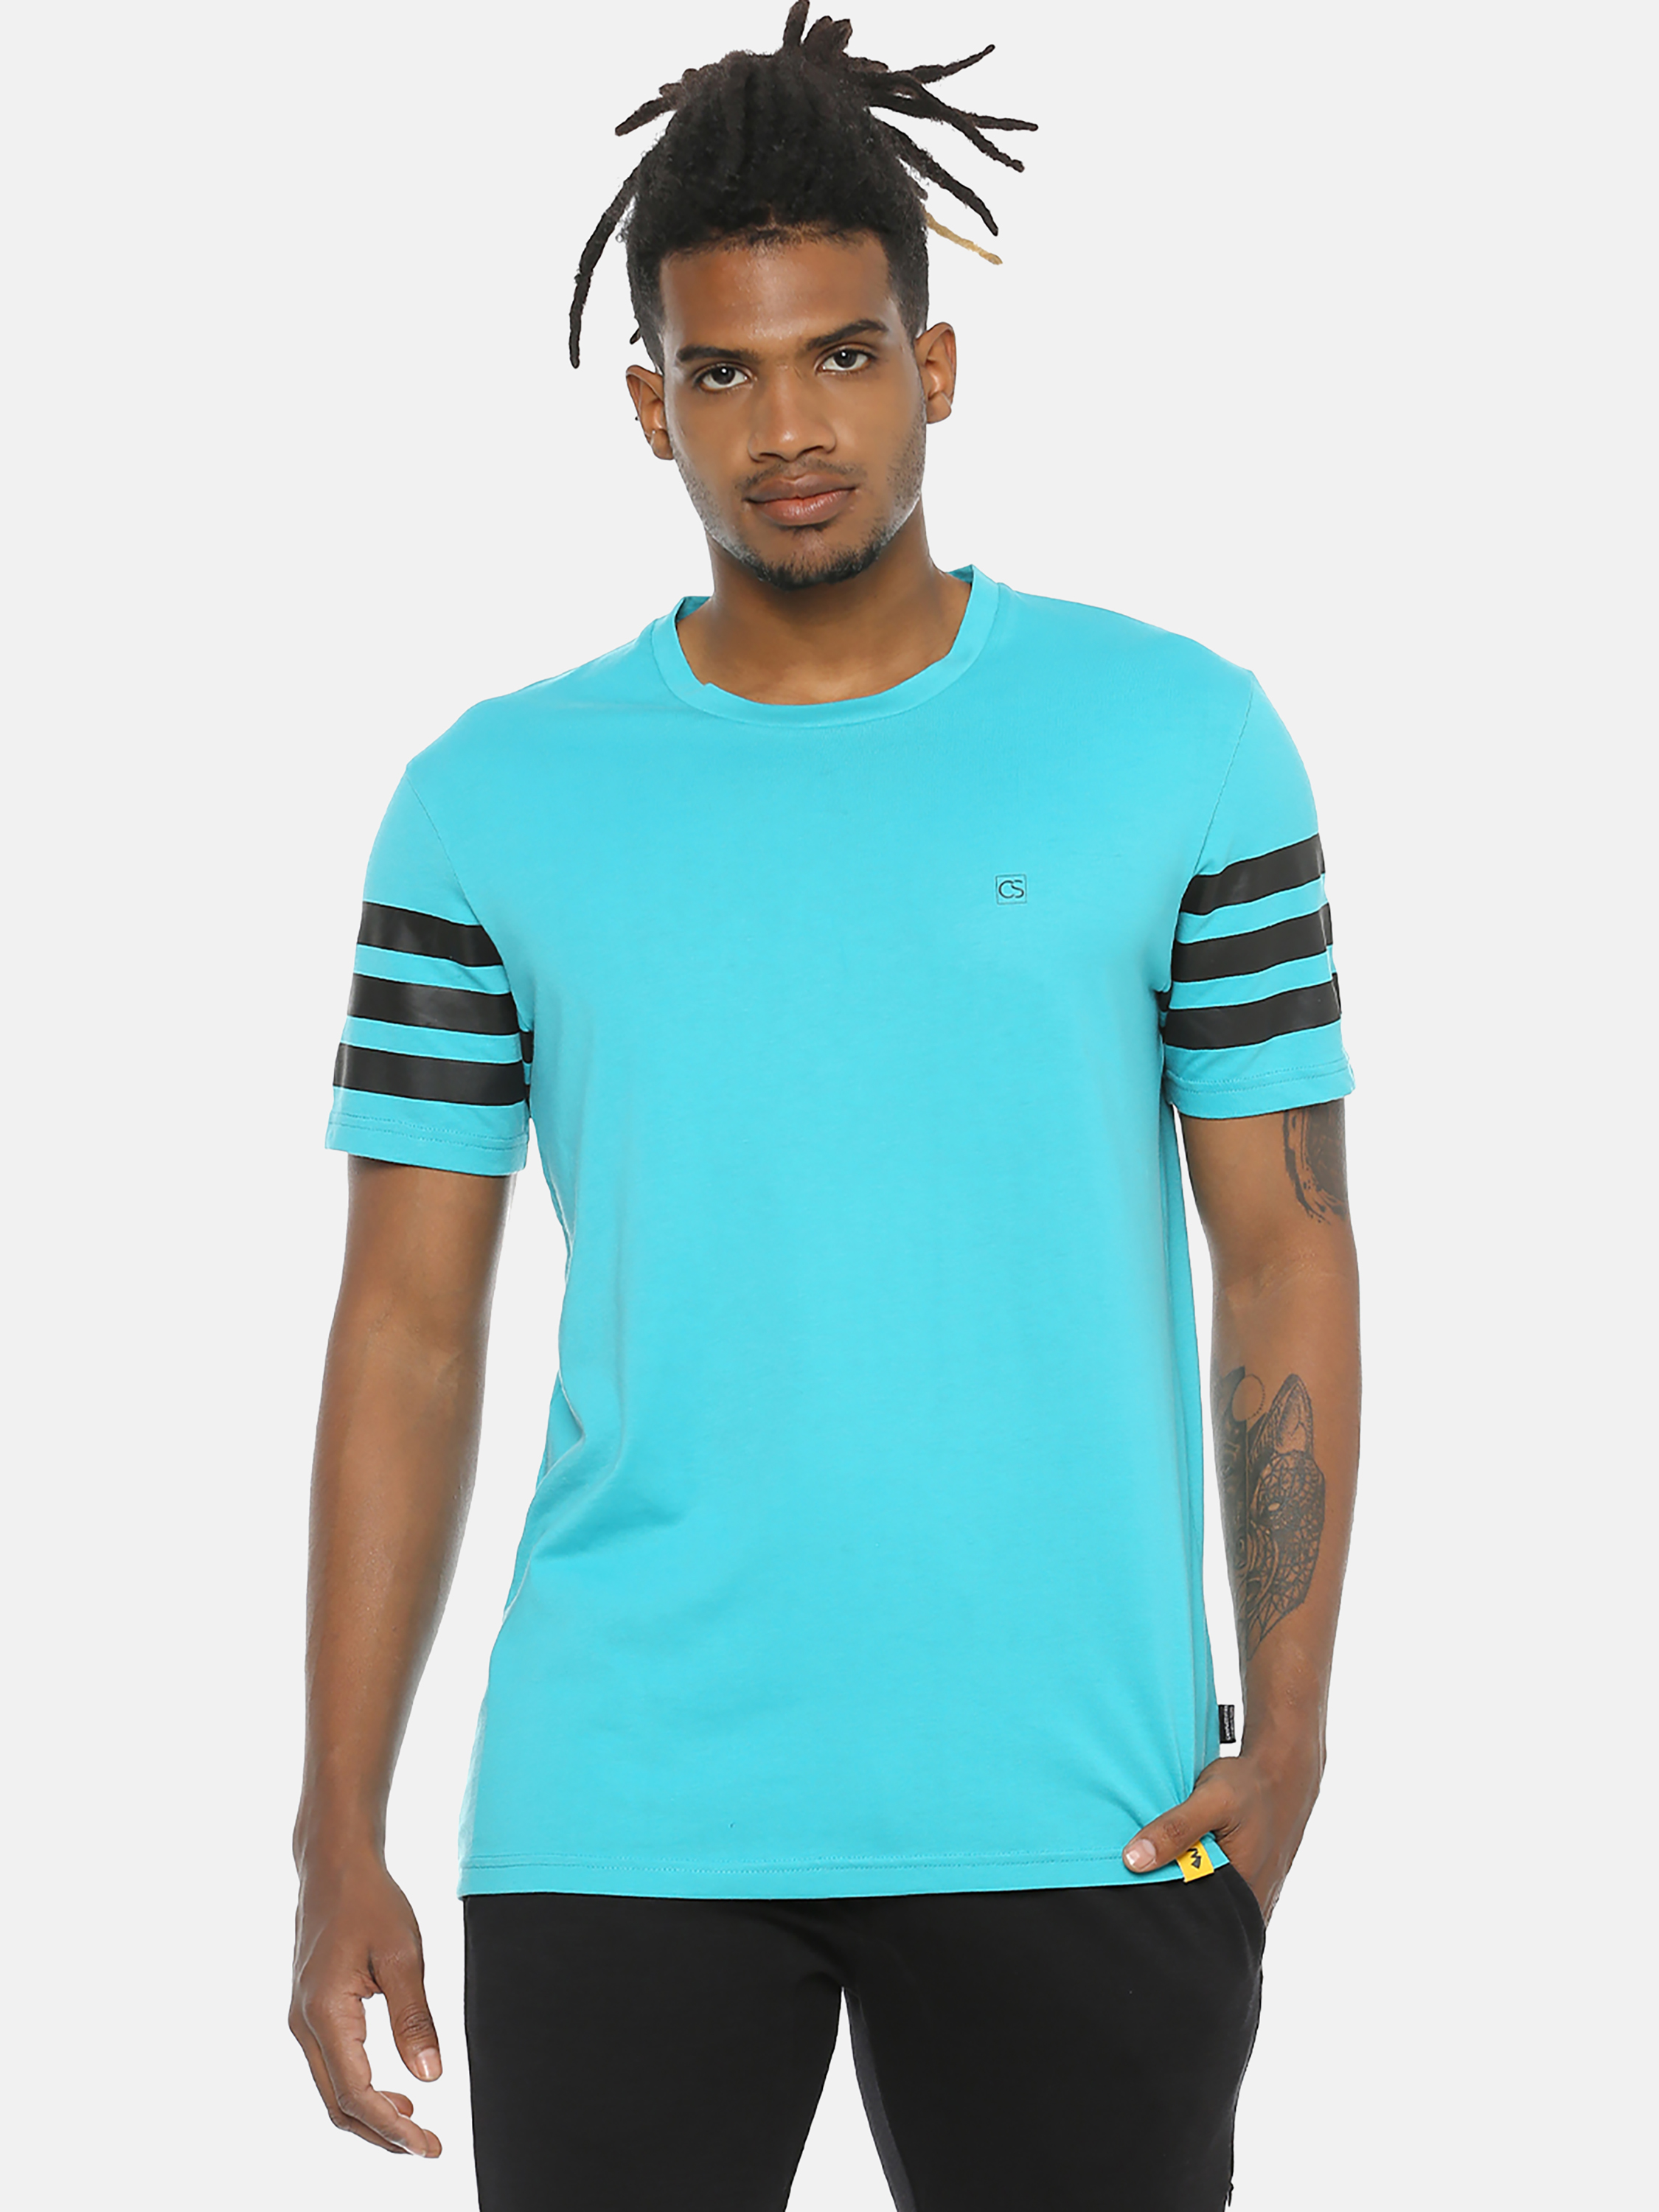 Campus Sutra Men Stylish Sleeve Striped Casual T-shirts